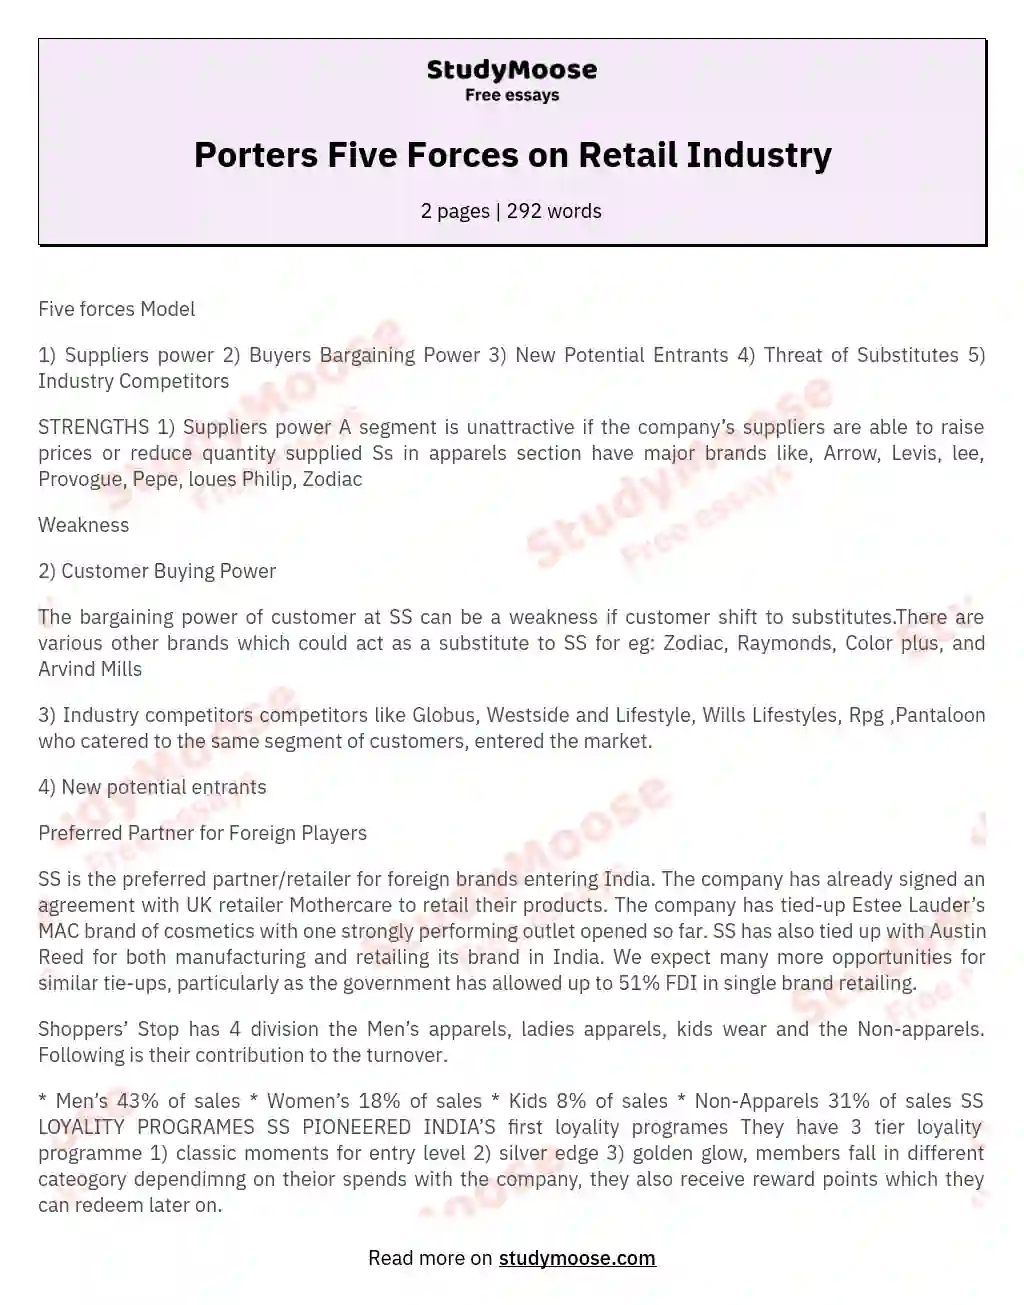 Porters Five Forces on Retail Industry